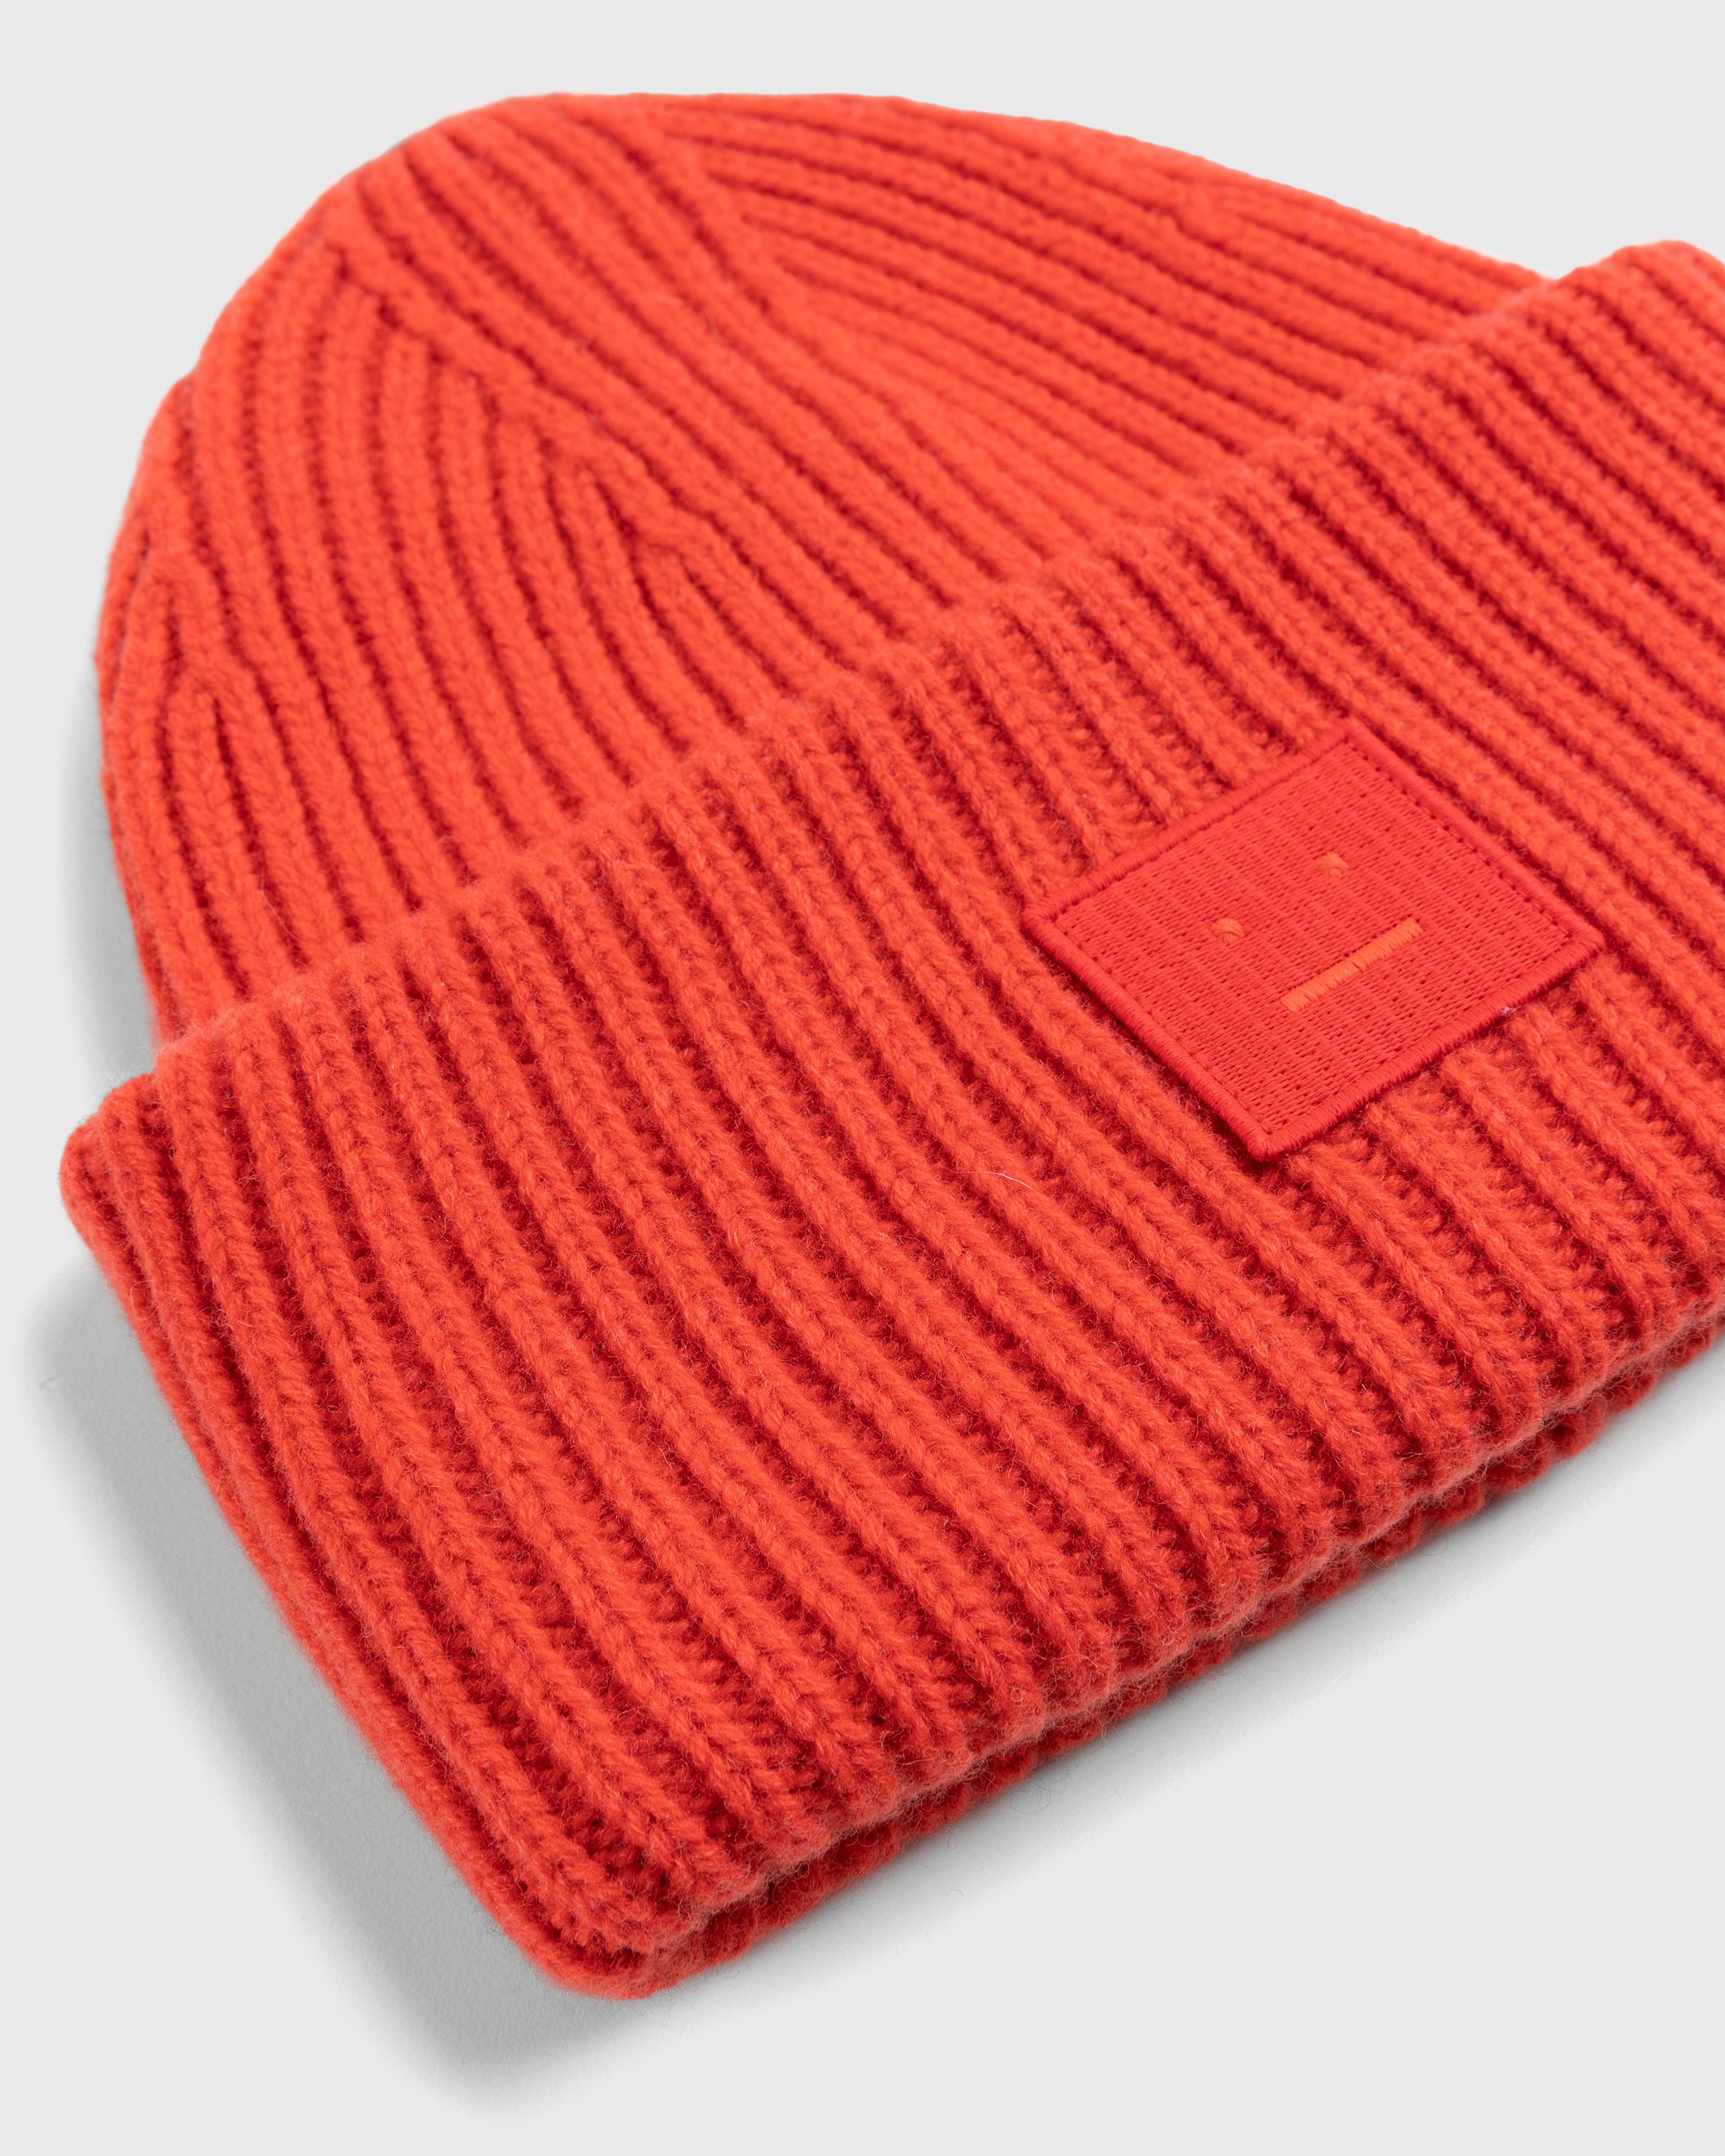 Acne Studios - Large Face Logo Beanie Red - Accessories - Red - Image 3